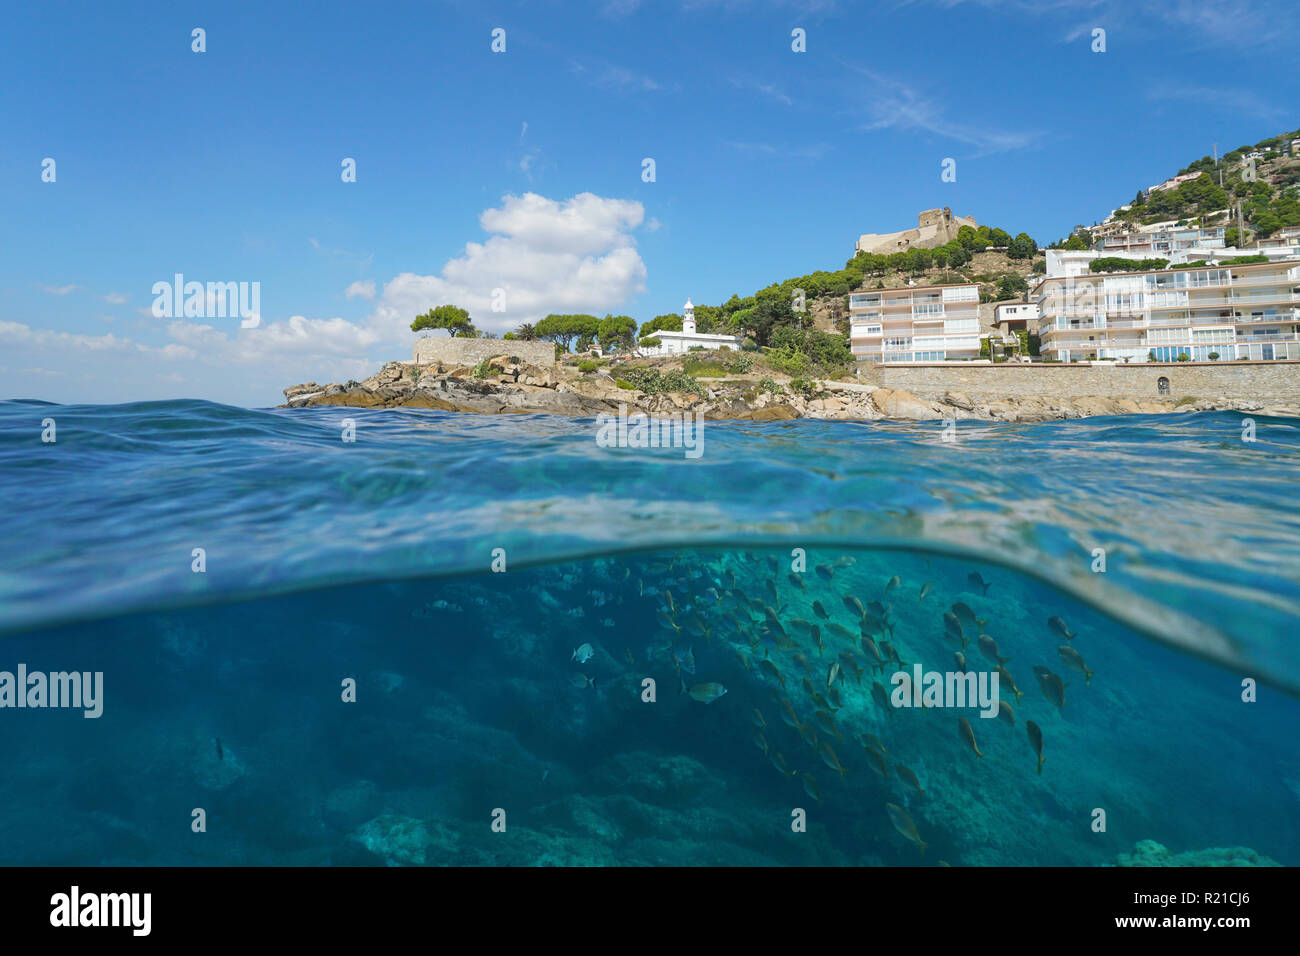 A lighthouse and buildings on a rocky coastline with a school of fish underwater, split view, Spain, Costa Brava, Roses, Mediterranean sea, Catalonia Stock Photo